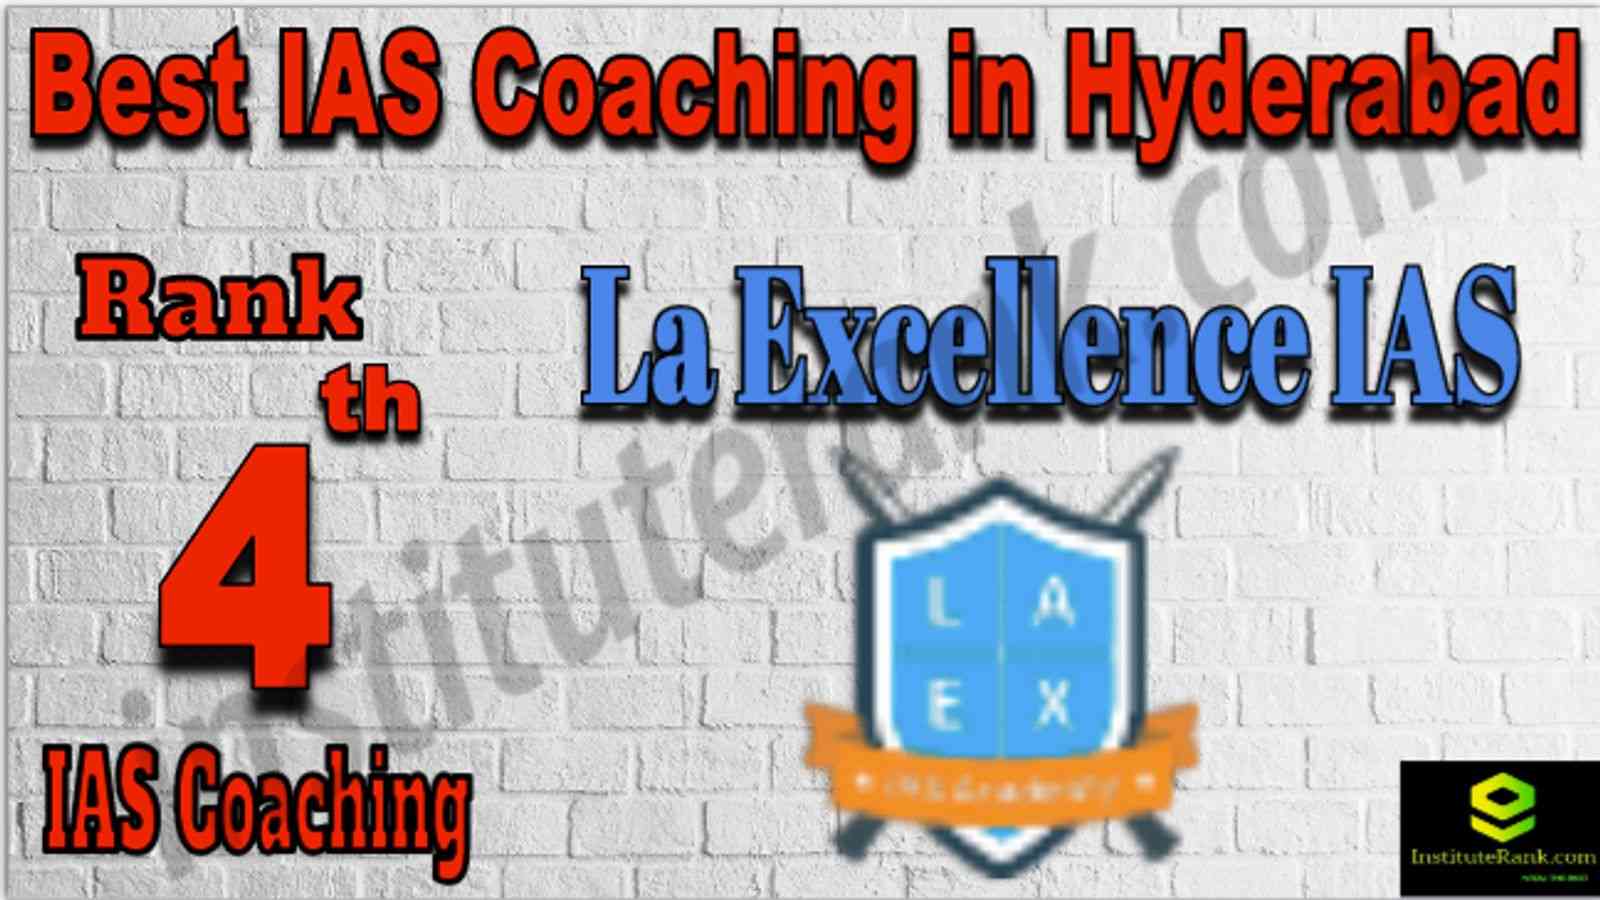 4th Top IAS Coaching in Hyderabad